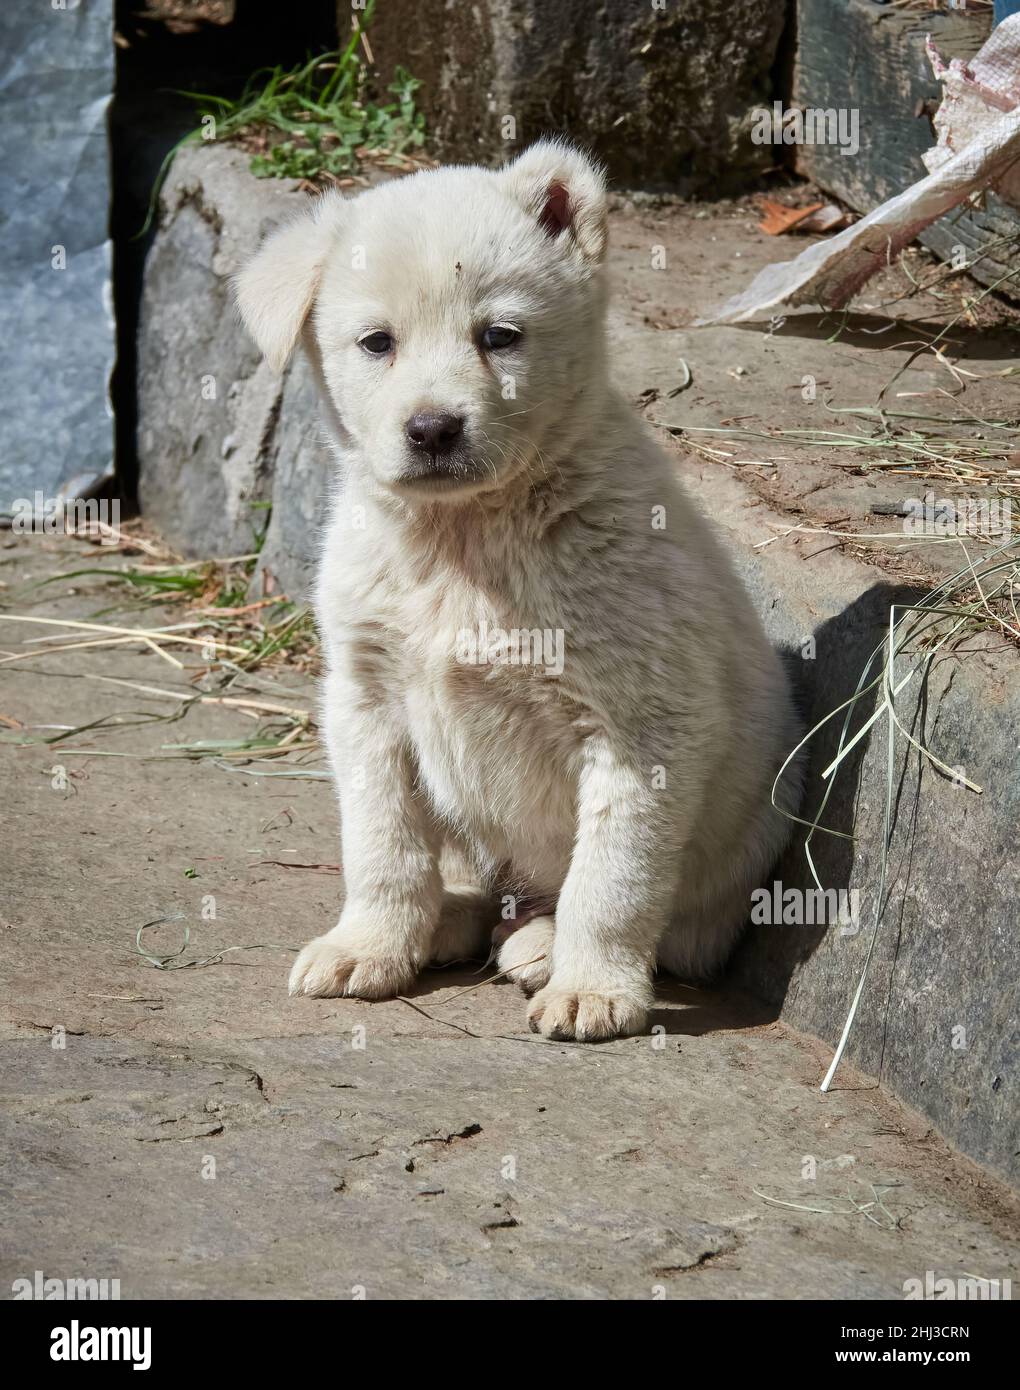 White Himalayan shepherd dog puppy in a mountain village in the Saryu Valley Uttarakhand Northern India Stock Photo